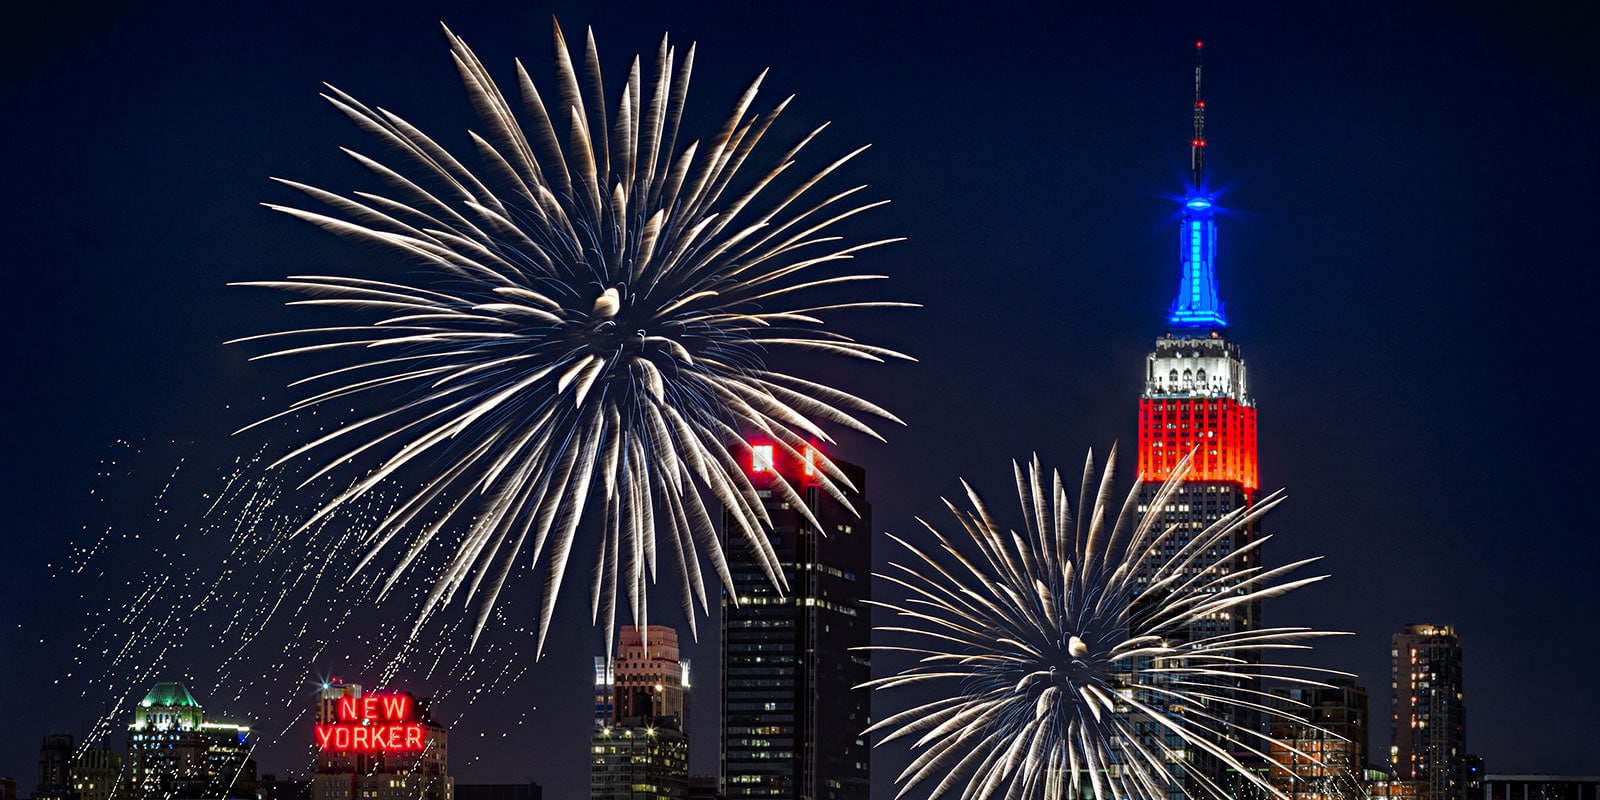 Macy's 4th of July Fireworks on the Hudson River (Eduard4us/Dreamstime)